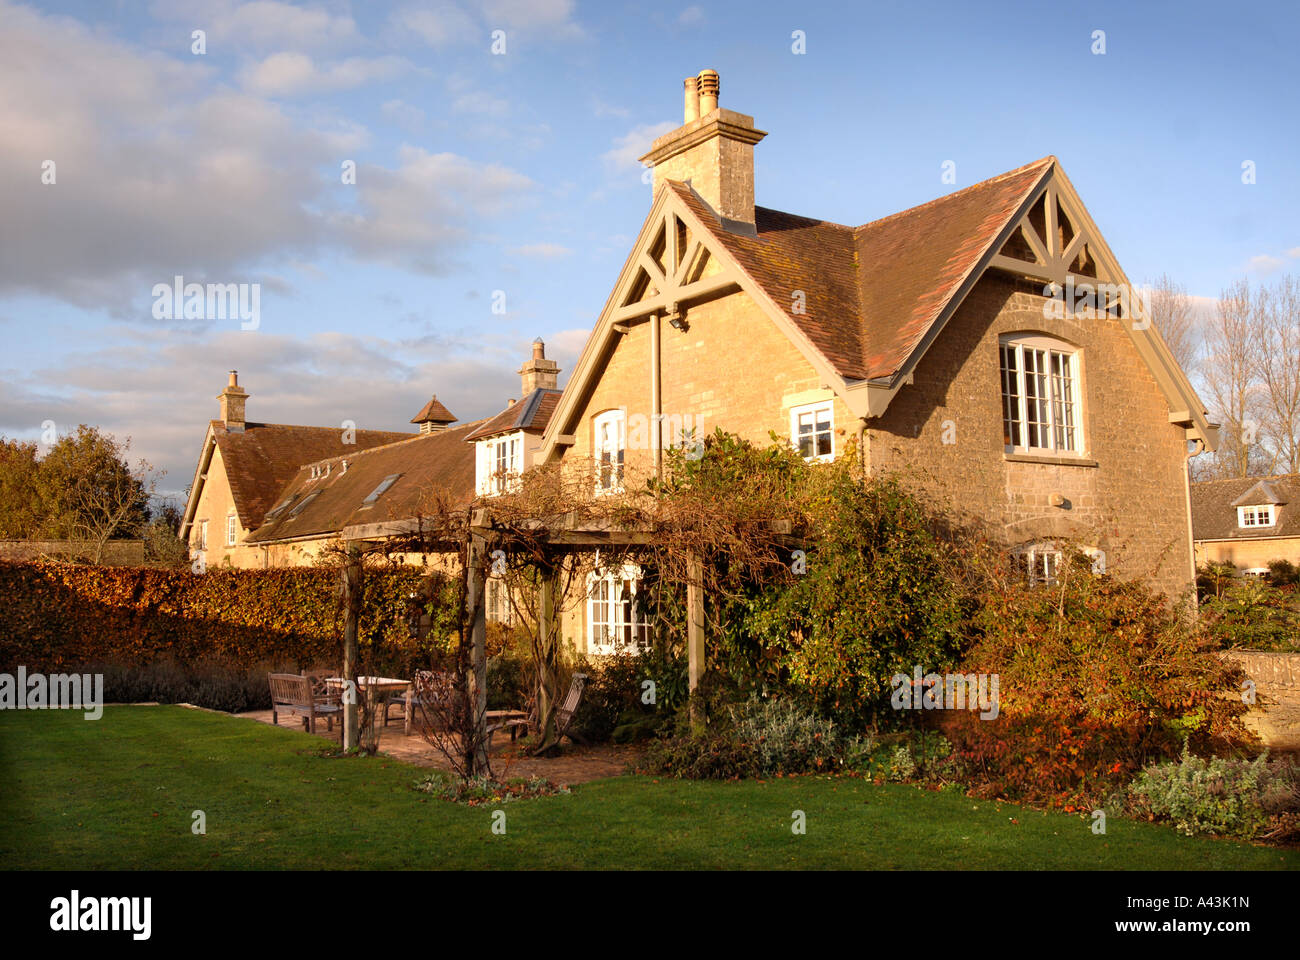 A LUXURY BED AND BREAKFAST APARTMENT PART OF A CONVERTED STABLE BLOCK UK Stock Photo